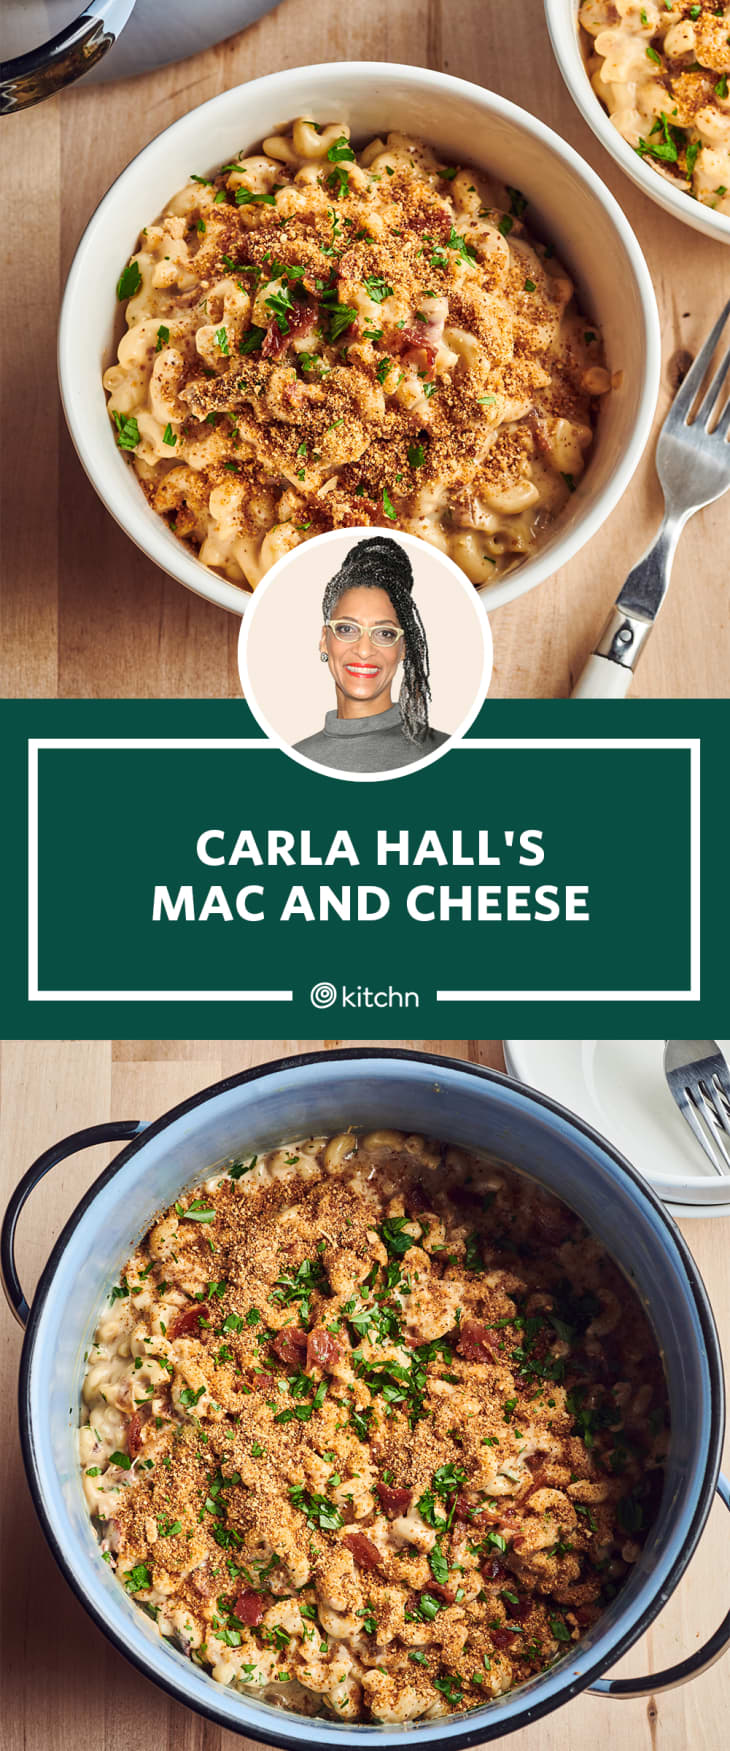 I Tried Carla Hall's Stovetop Mac and Cheese Recipe | The Kitchn